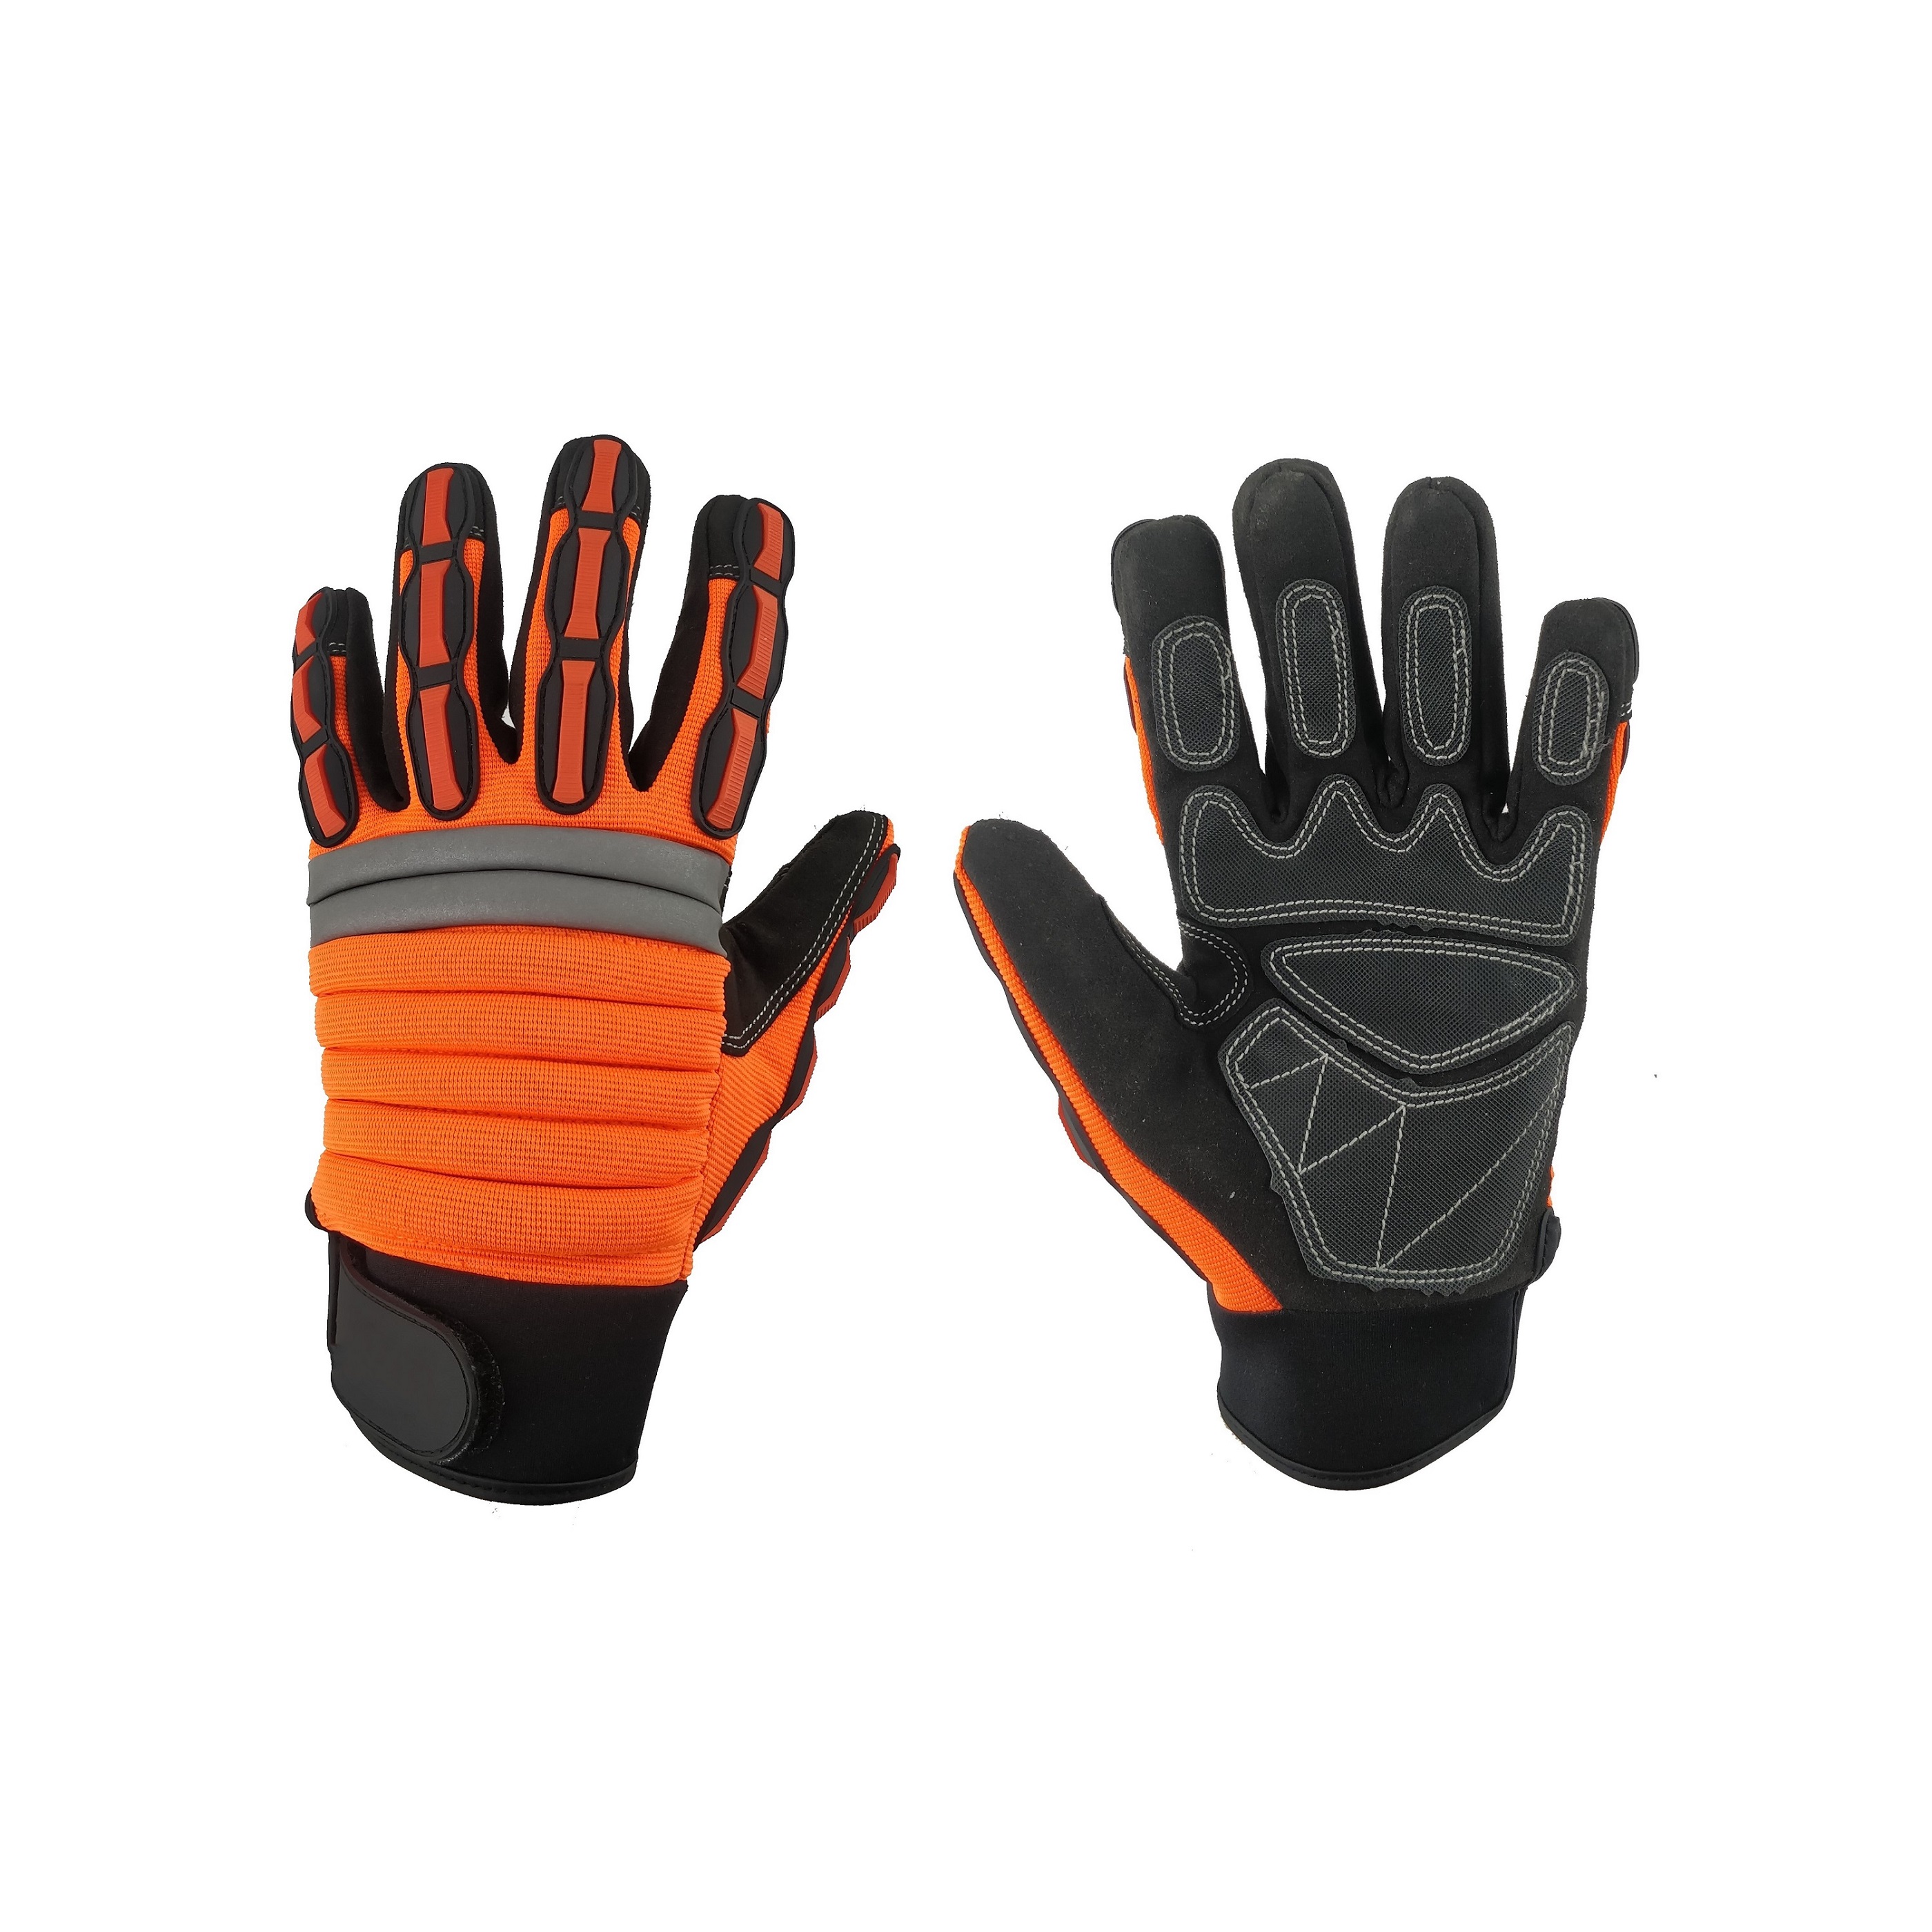 Safety Work Construction Industrial Protective Mechanical Guante Anti Cut Resistant Impact Mechanic Gloves